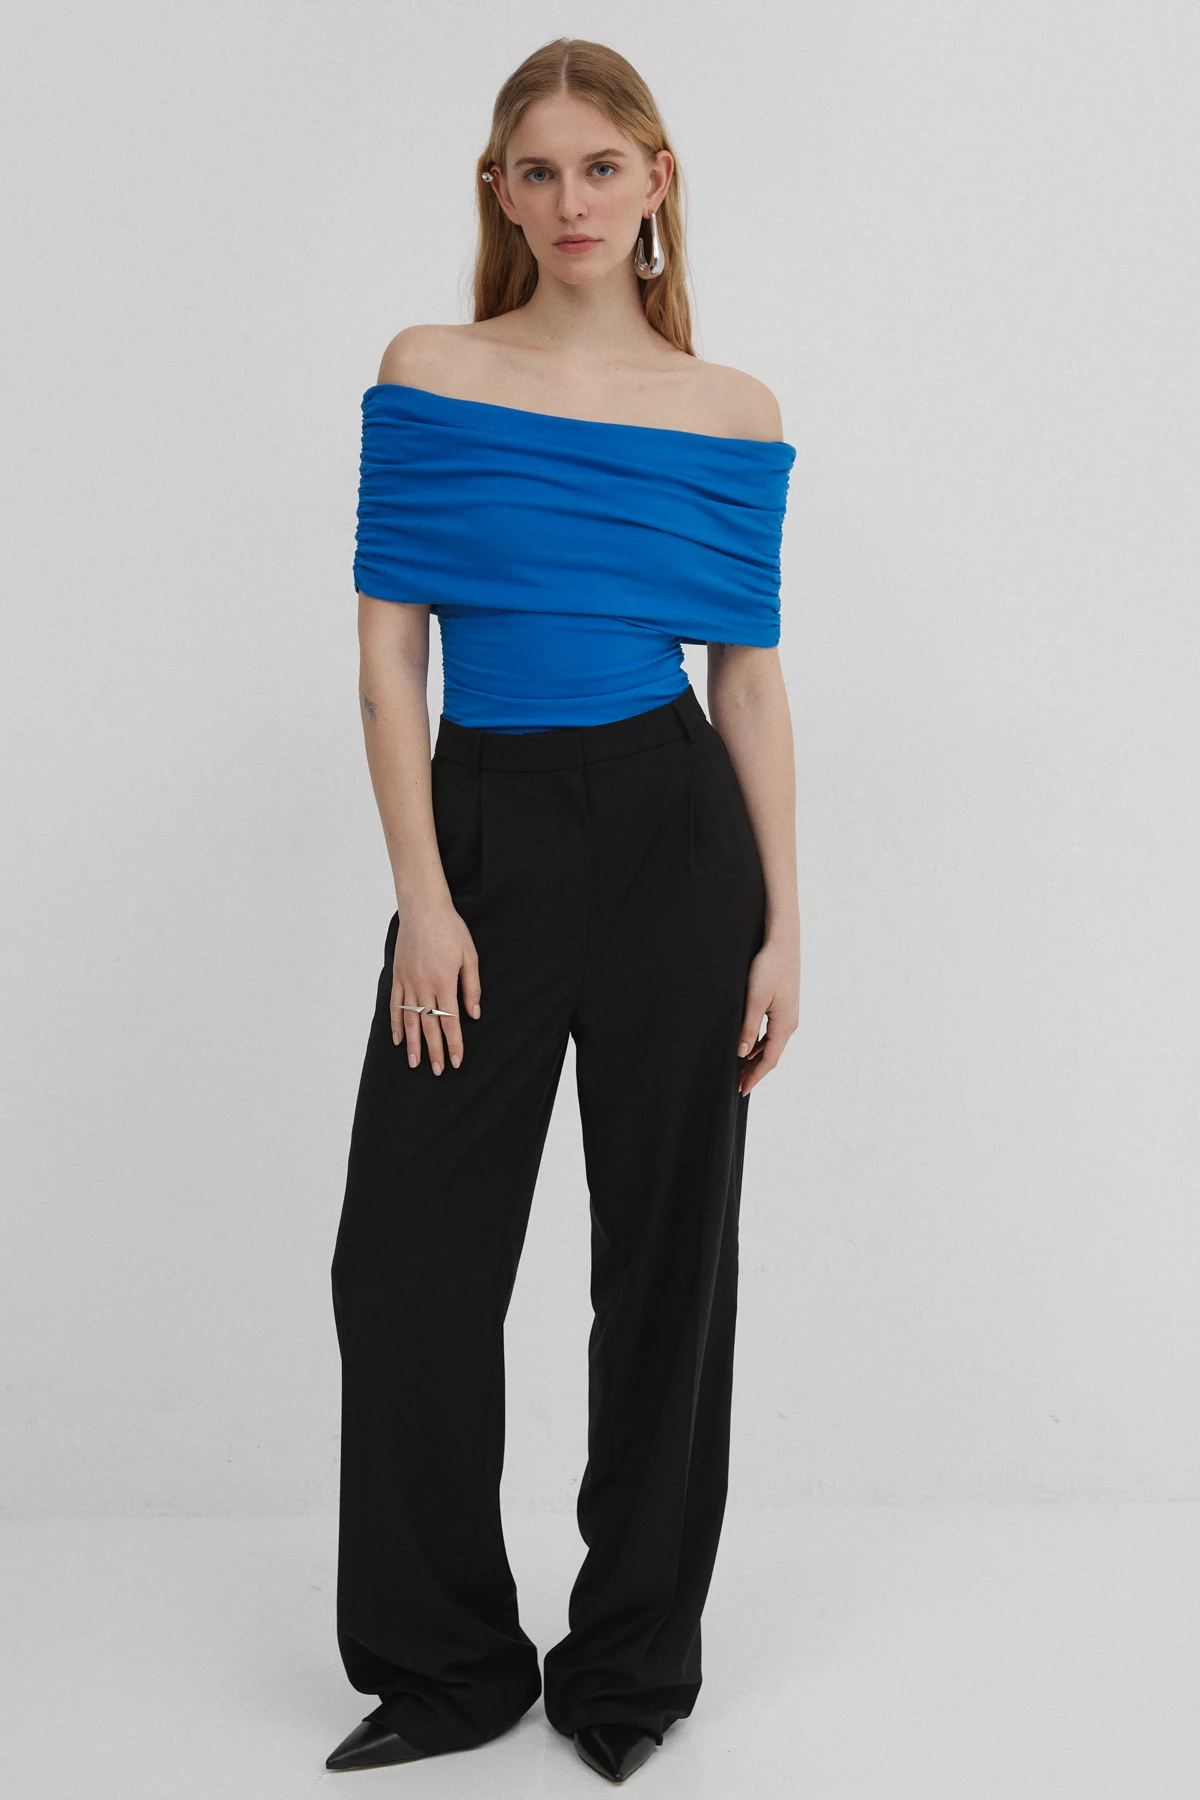 Blue top with open shoulders made of cotton, photo 2